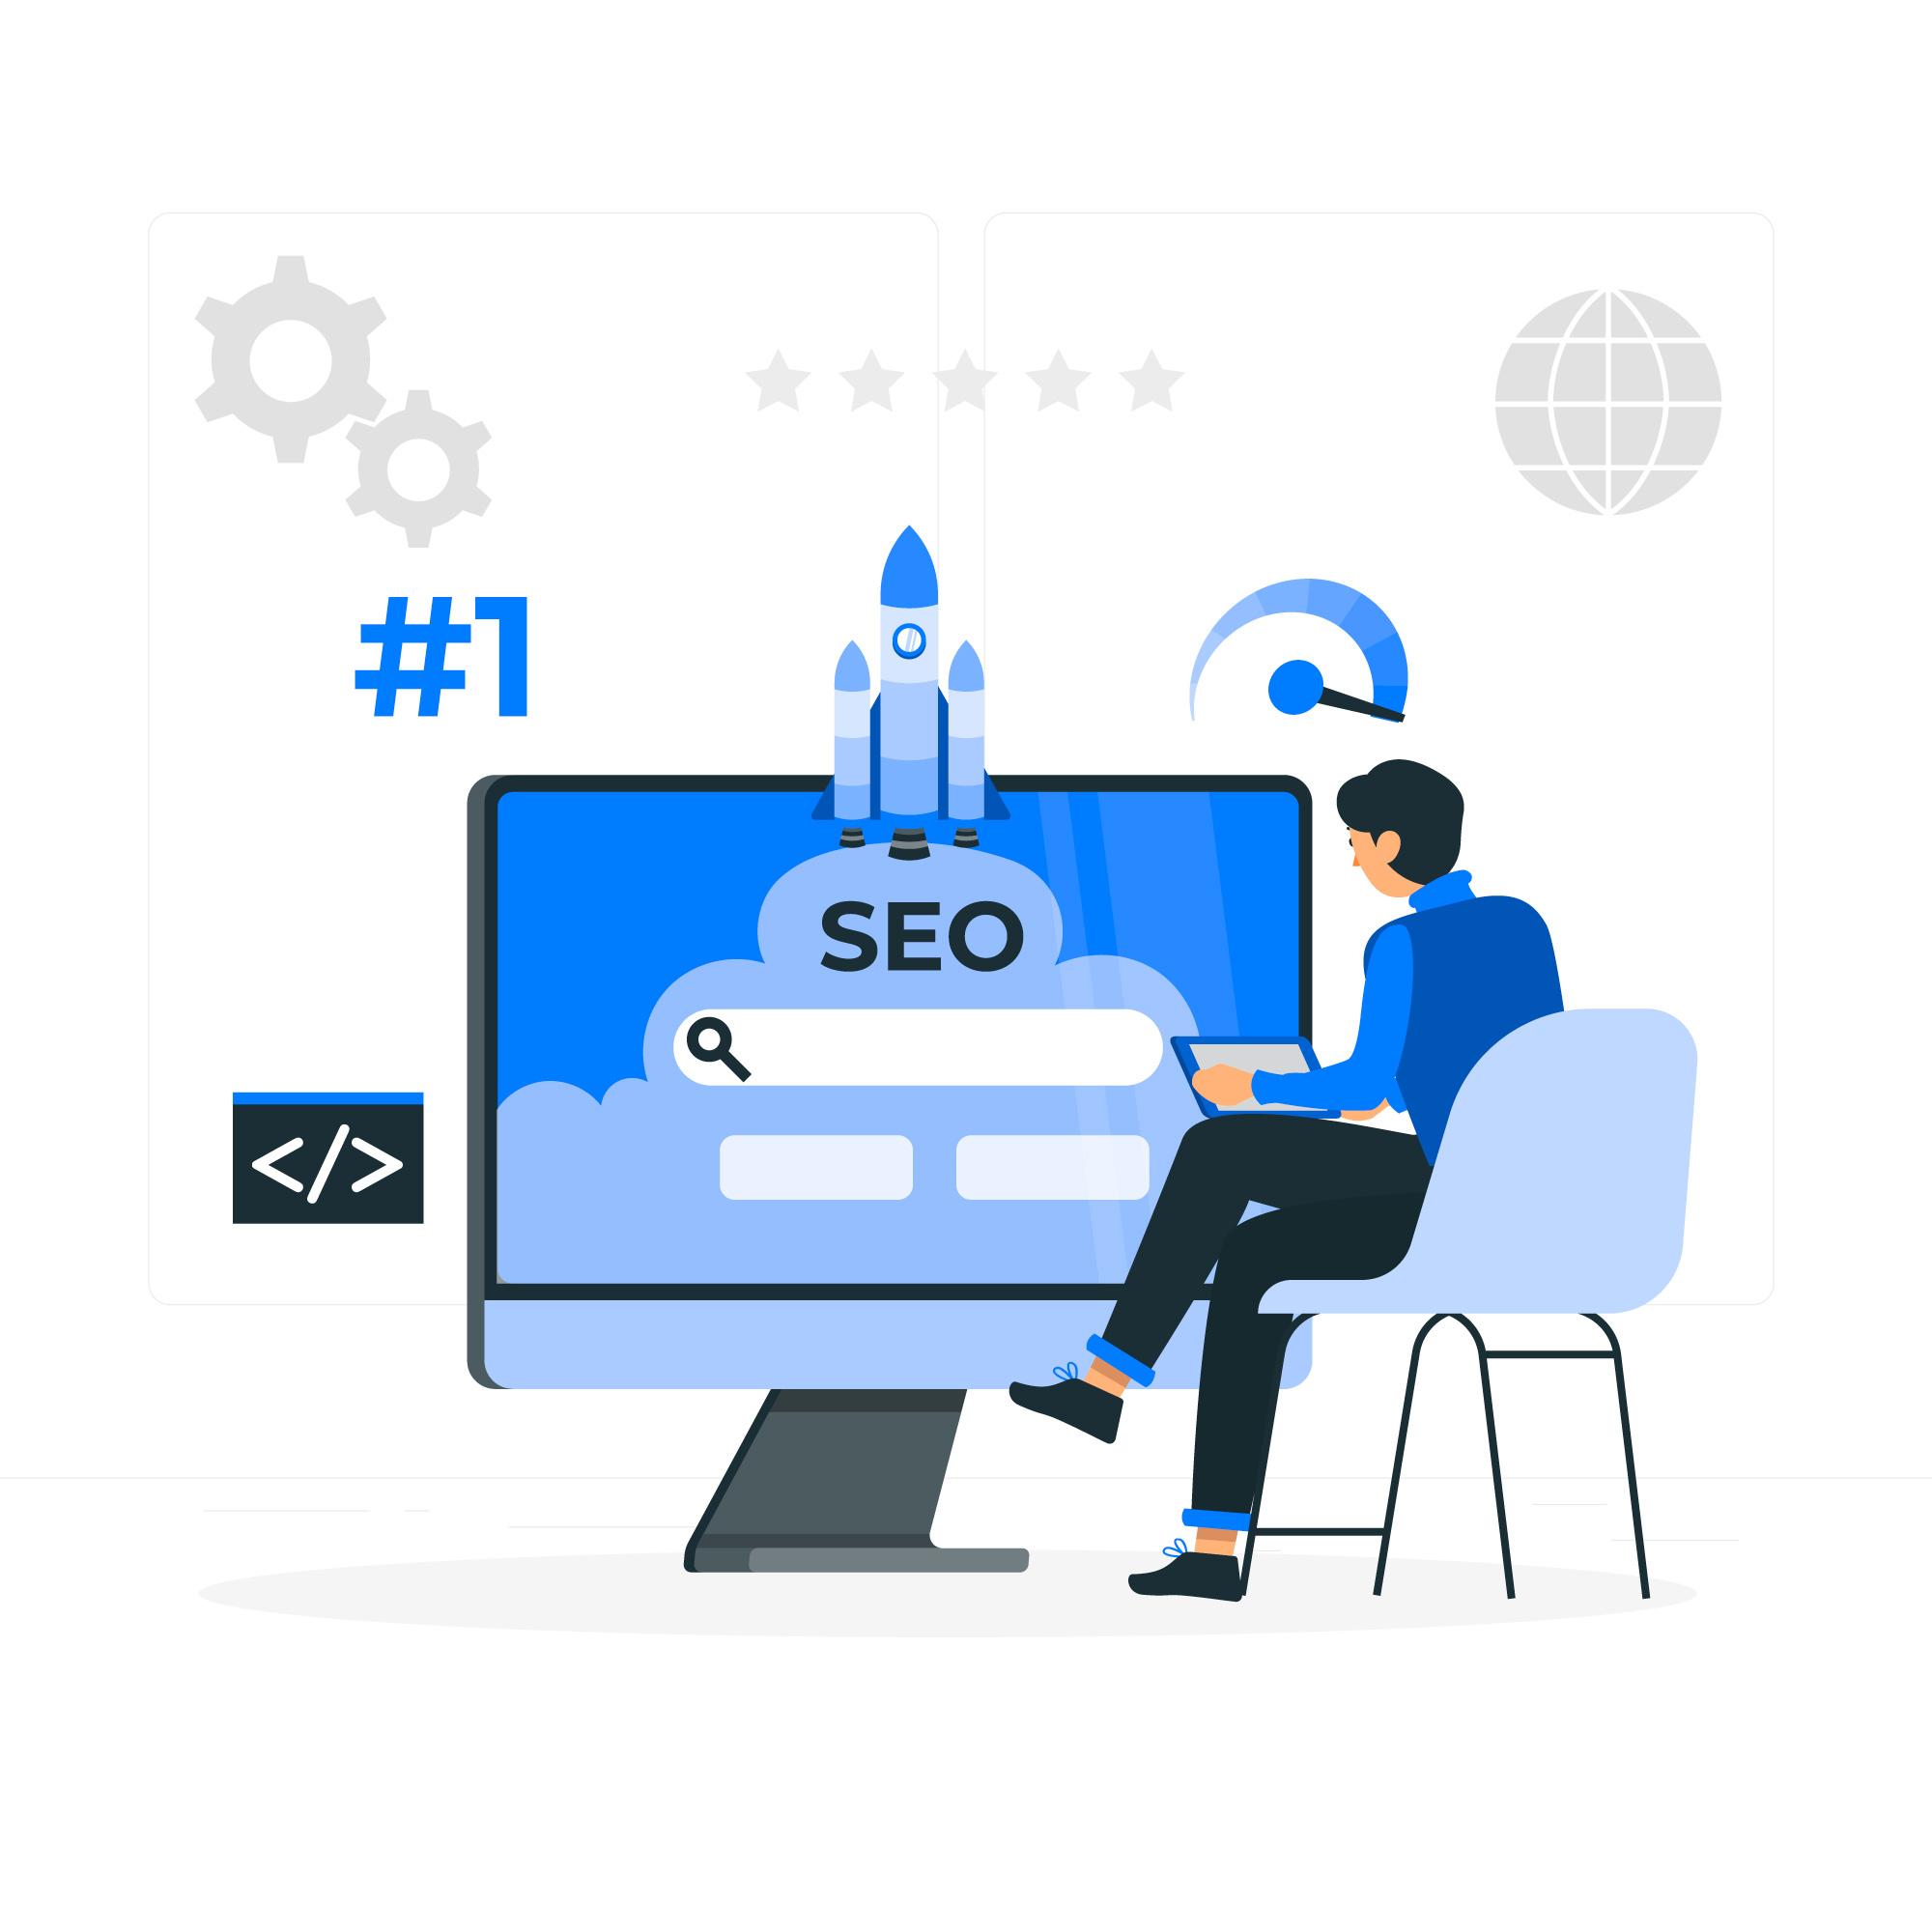 New Jersey SEO Agency - Get Page#1 Ranking Without Hassle